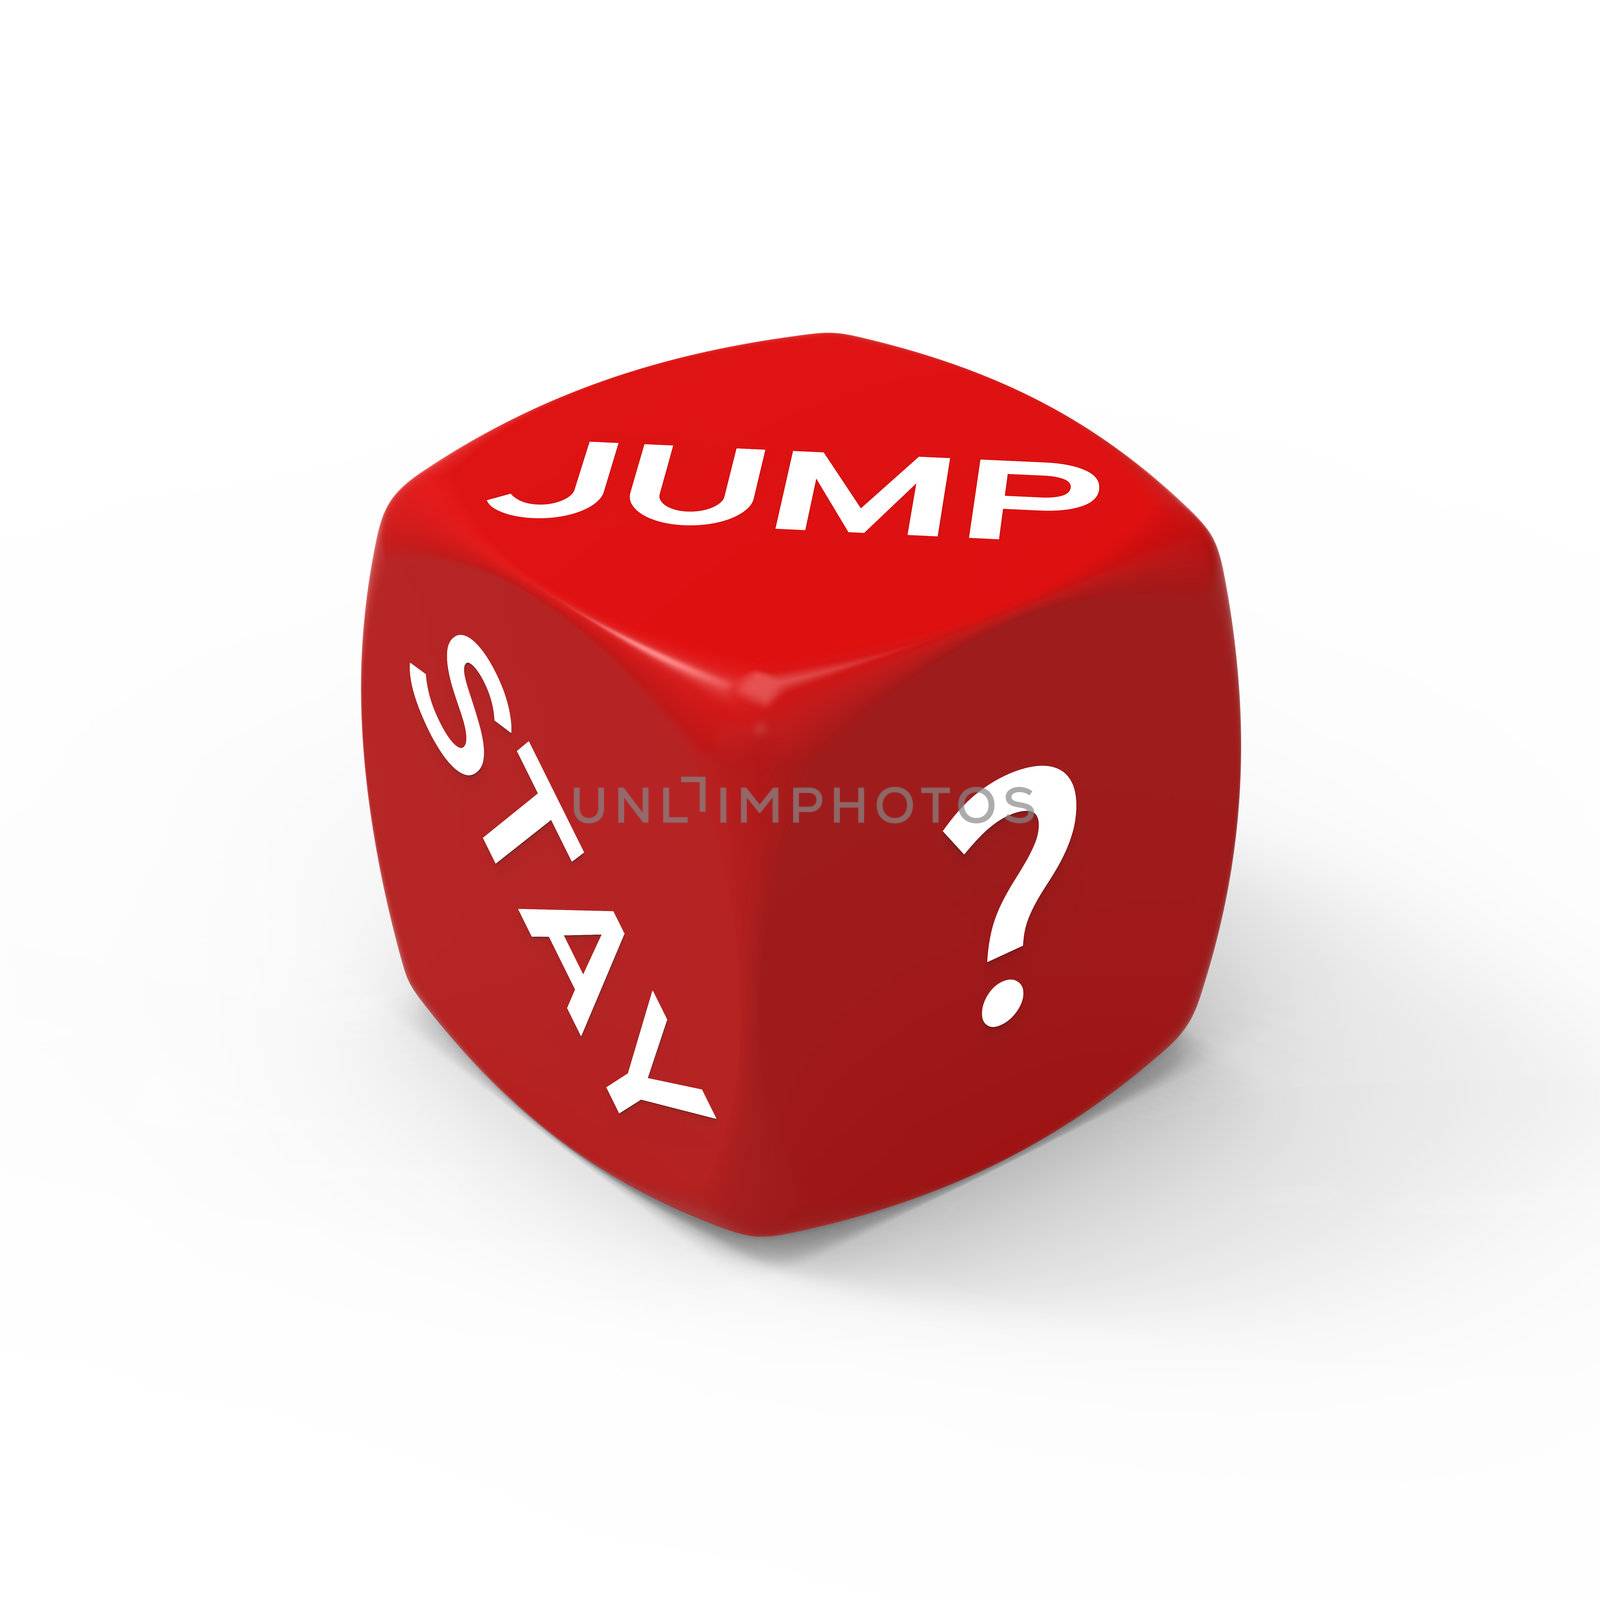 Jump or Stay - How to Make the Right Choice.